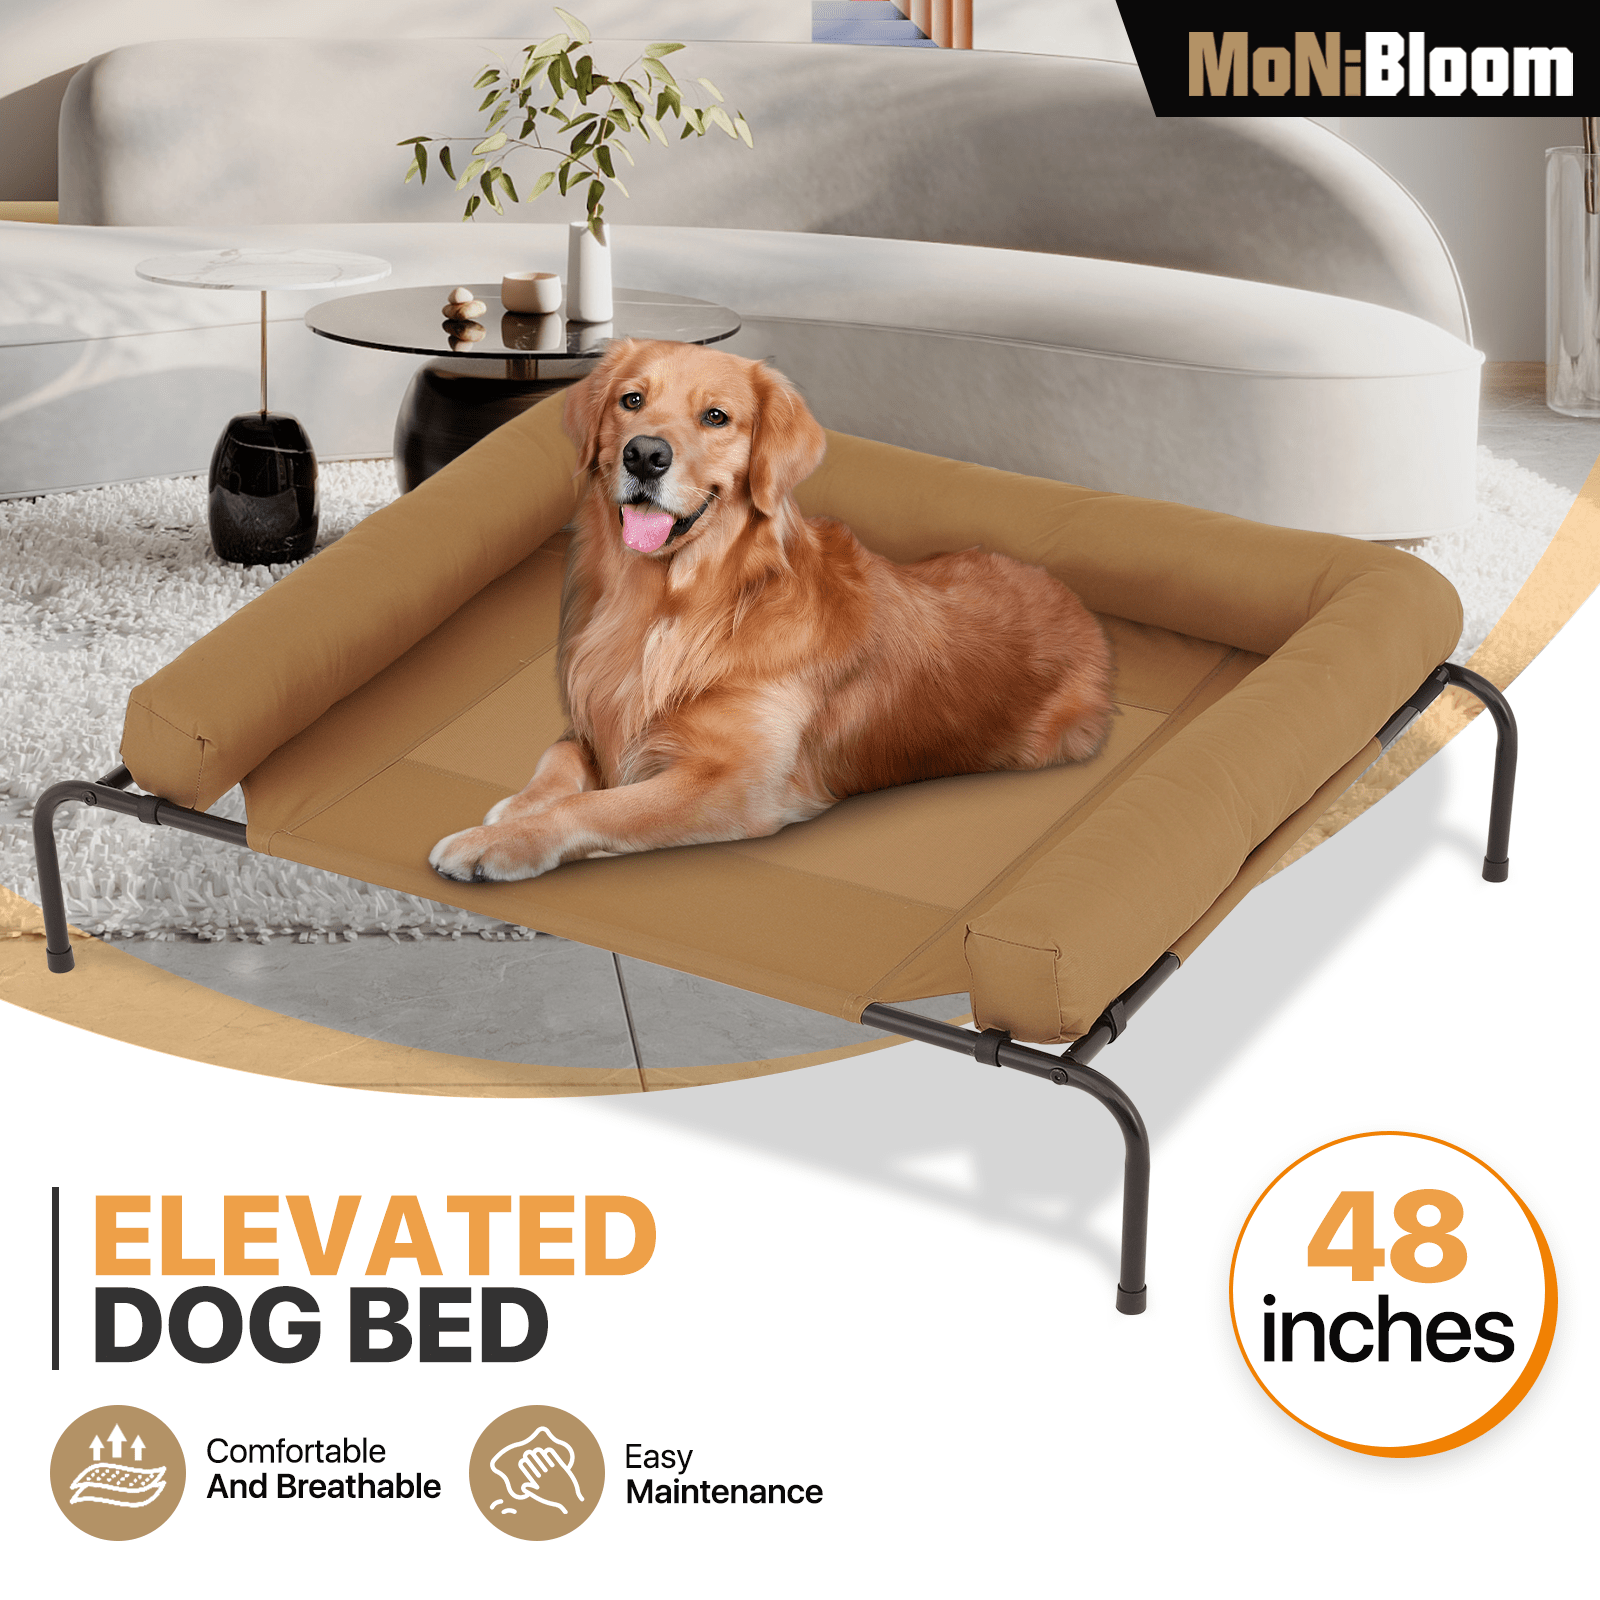 

Elevated Dog Bed With Removable Bolster, 2-in-1 Indoor/outdoor Dog Cot With Stable Anti-slip Feet & Breathable Mesh, 48 Inch Length For Large Dogs